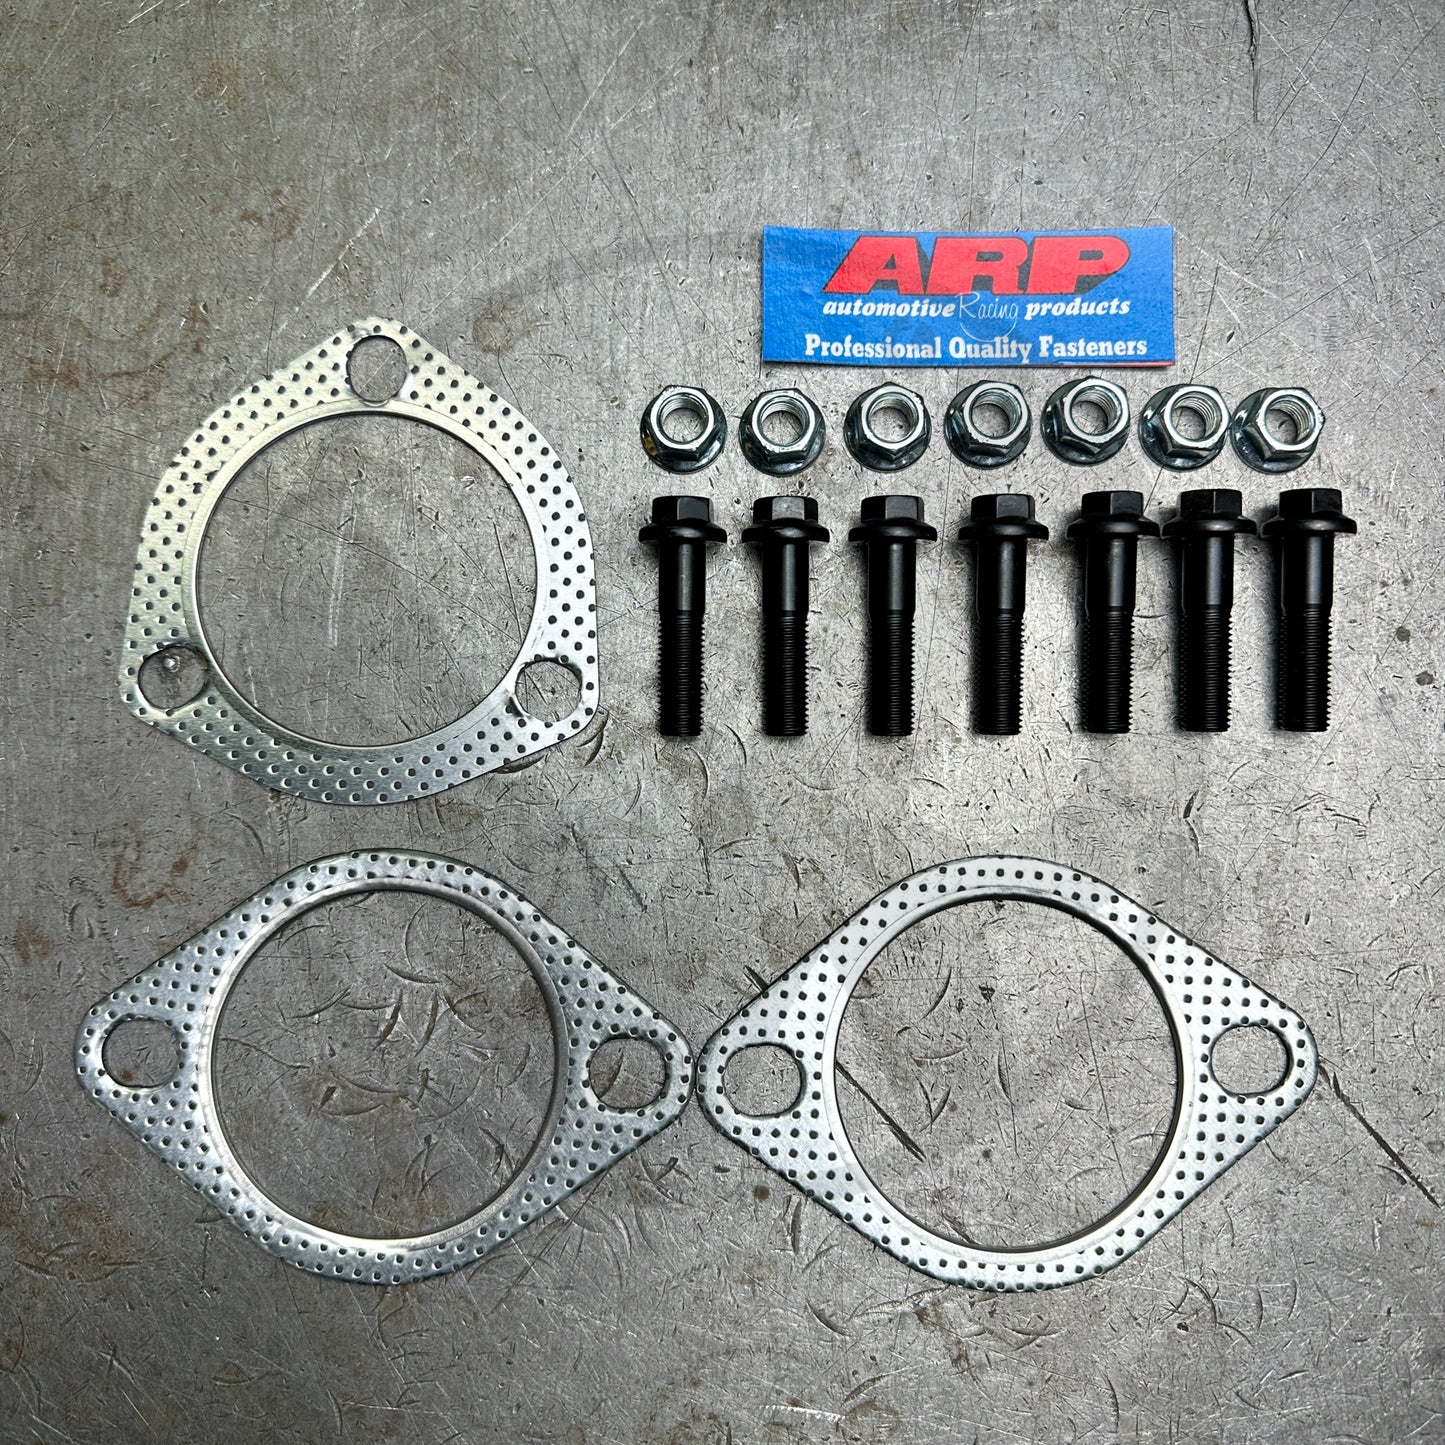 ARP Exhaust Gasket Hardware Kit (2.5 inch) For Honda Civic Acura Integra (Stainless Nuts)